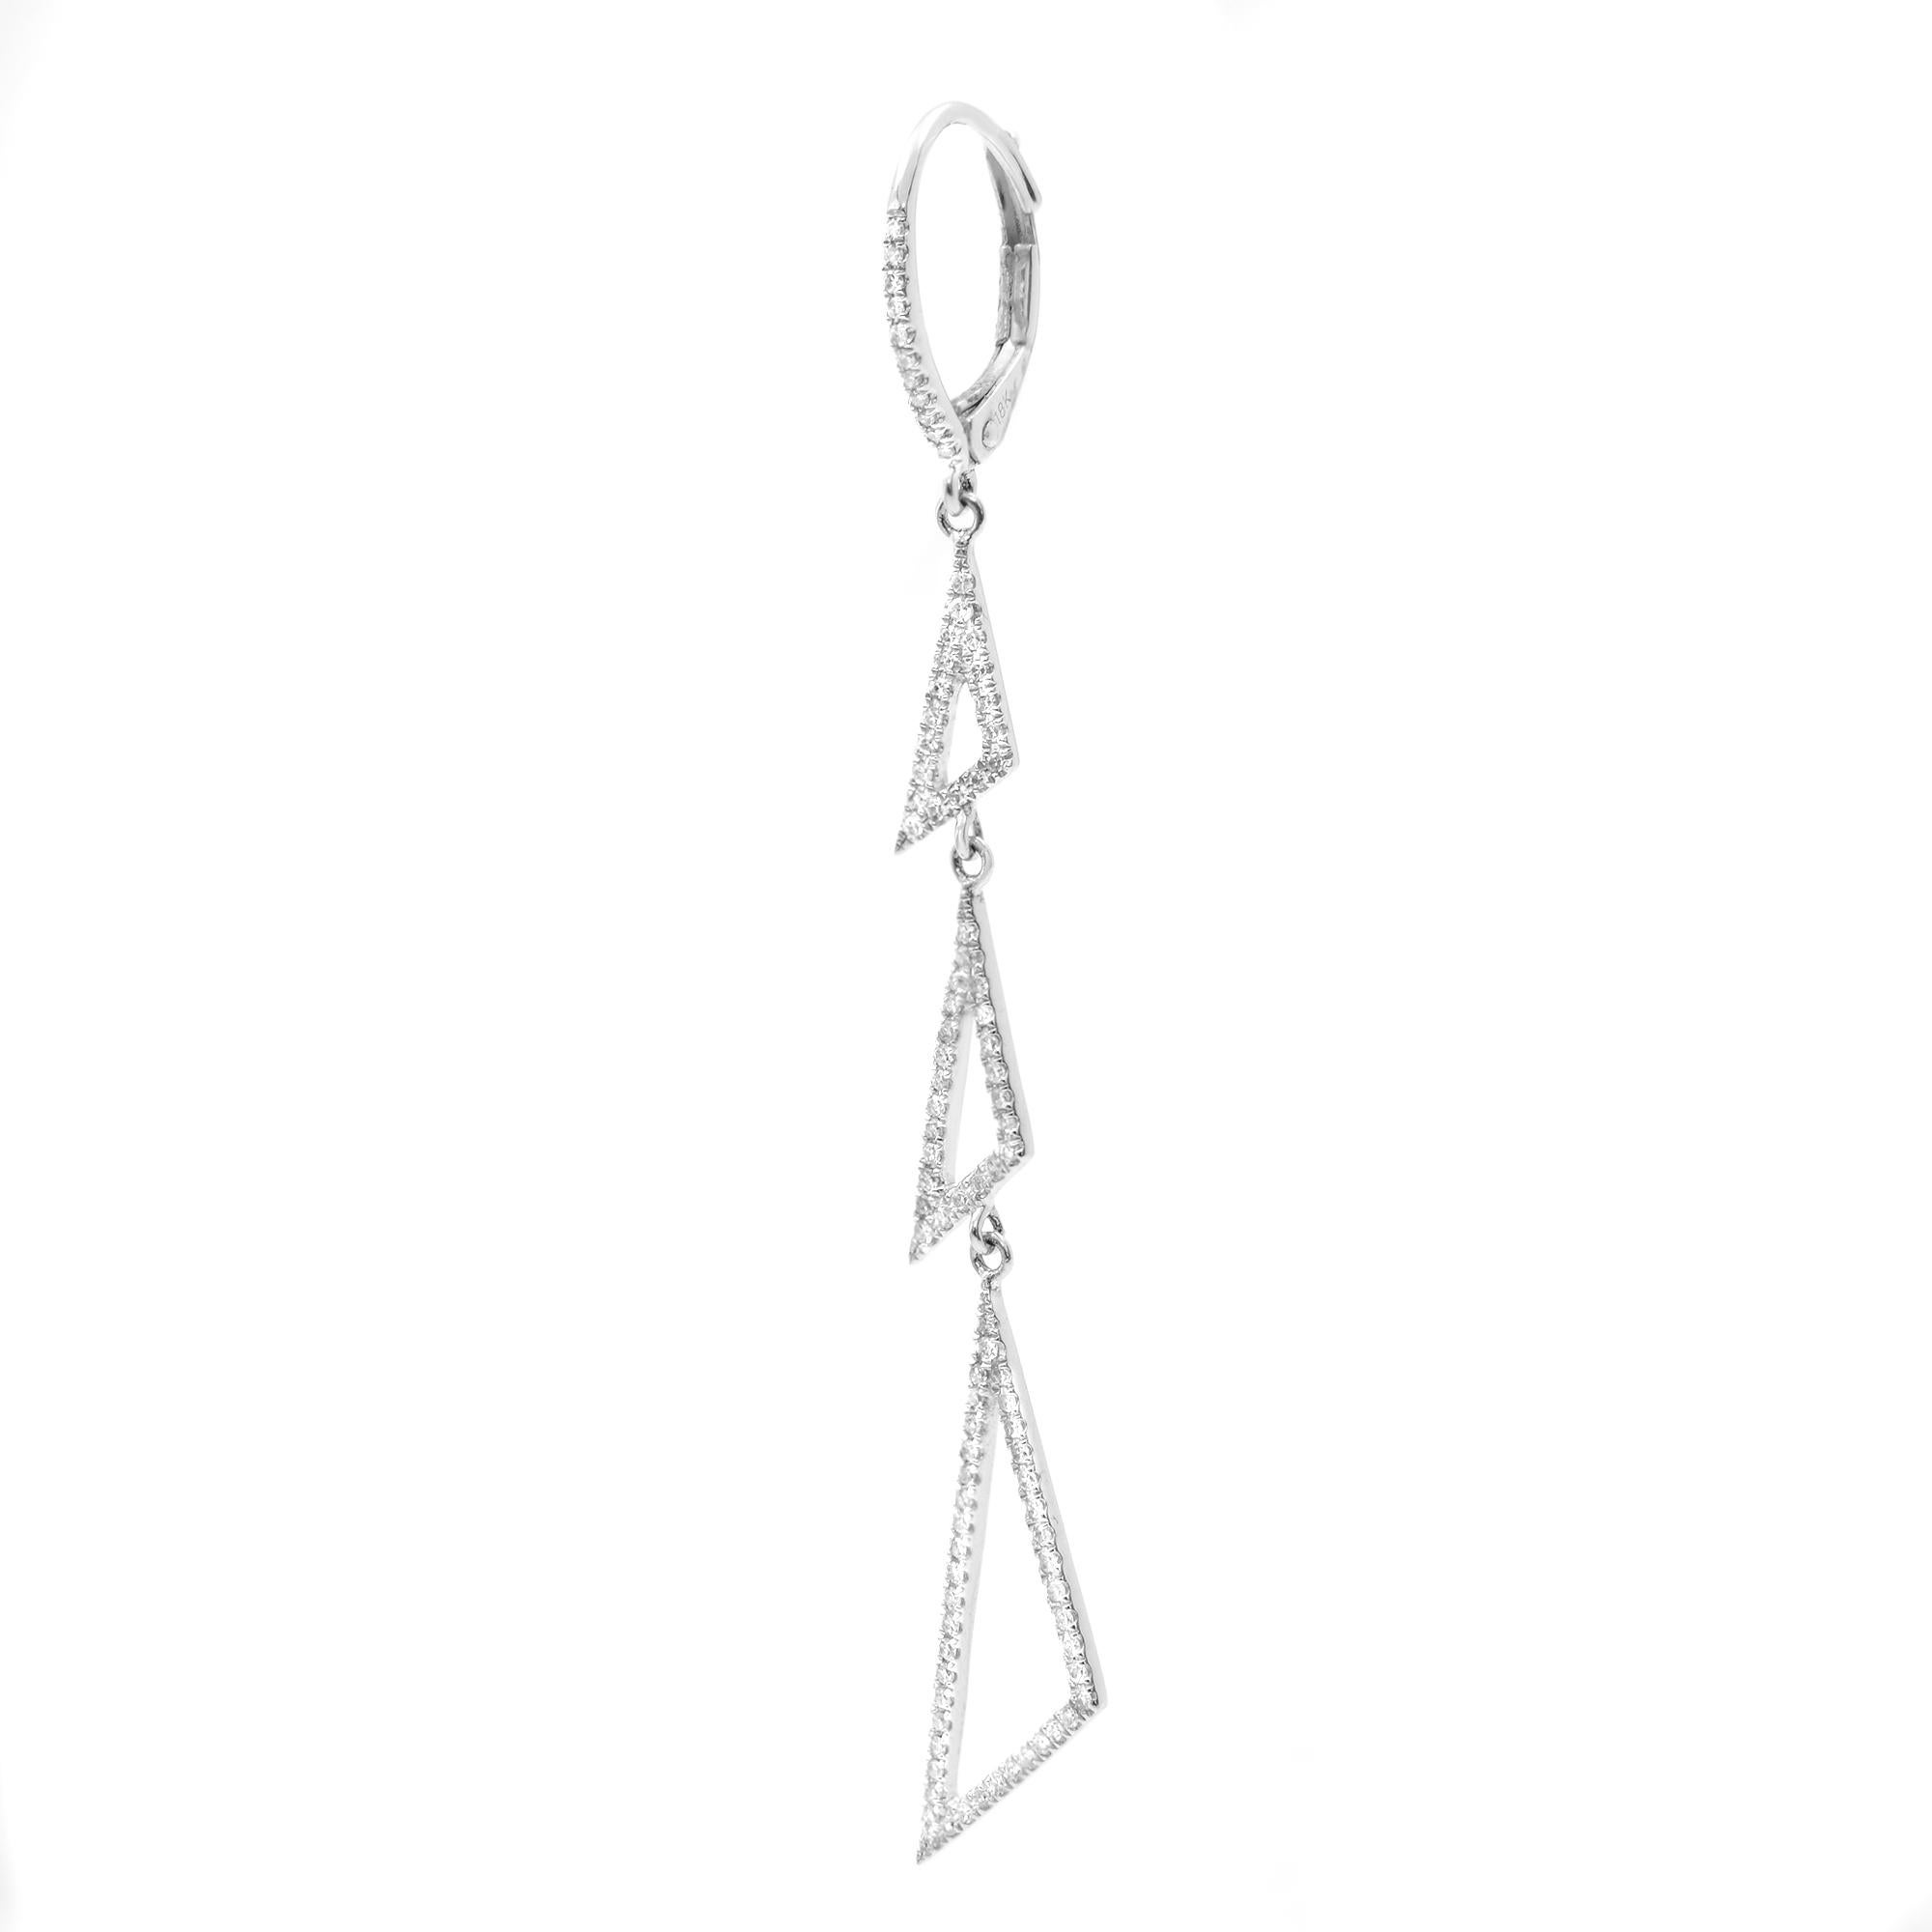 Shimmering round diamonds sway along 18K white gold chains in these stunning women's drop earrings. Secured with lever backs. The earrings have a total diamond weight of 0.45cttw. Diamond color I and clarity SI-I. Earring length: 2.50 inches. These